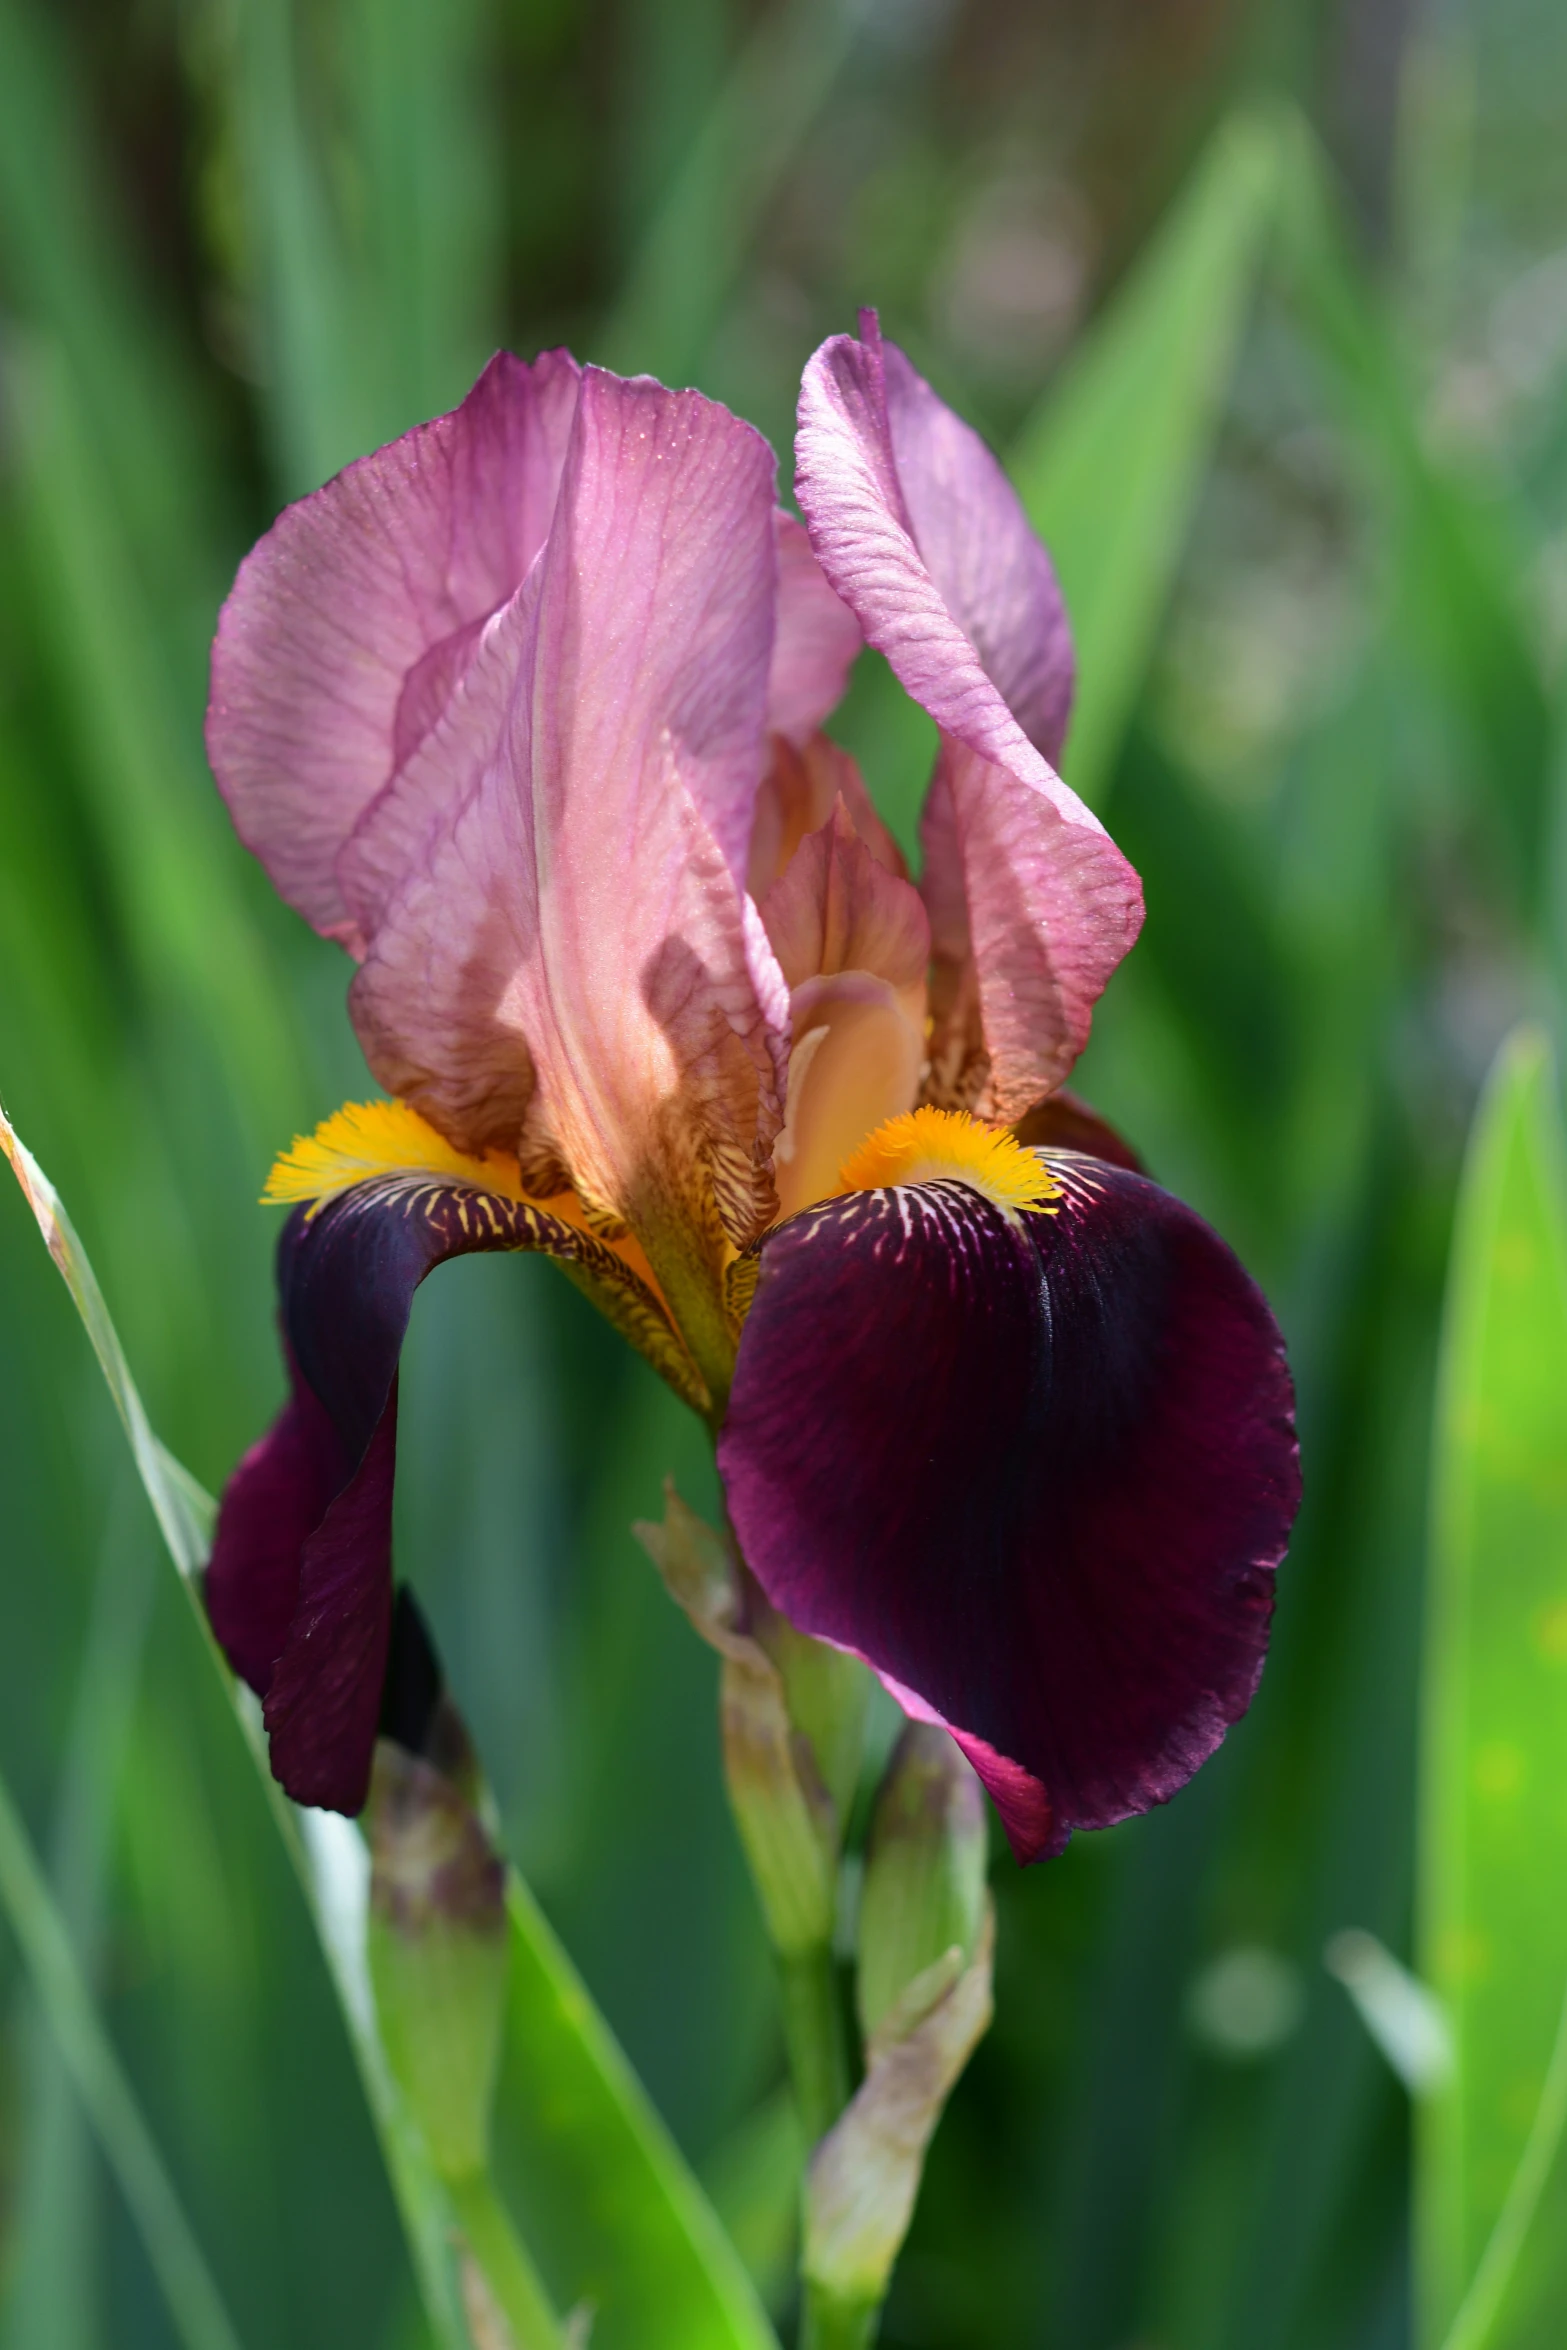 two purple flowers with yellow centers in front of green grass